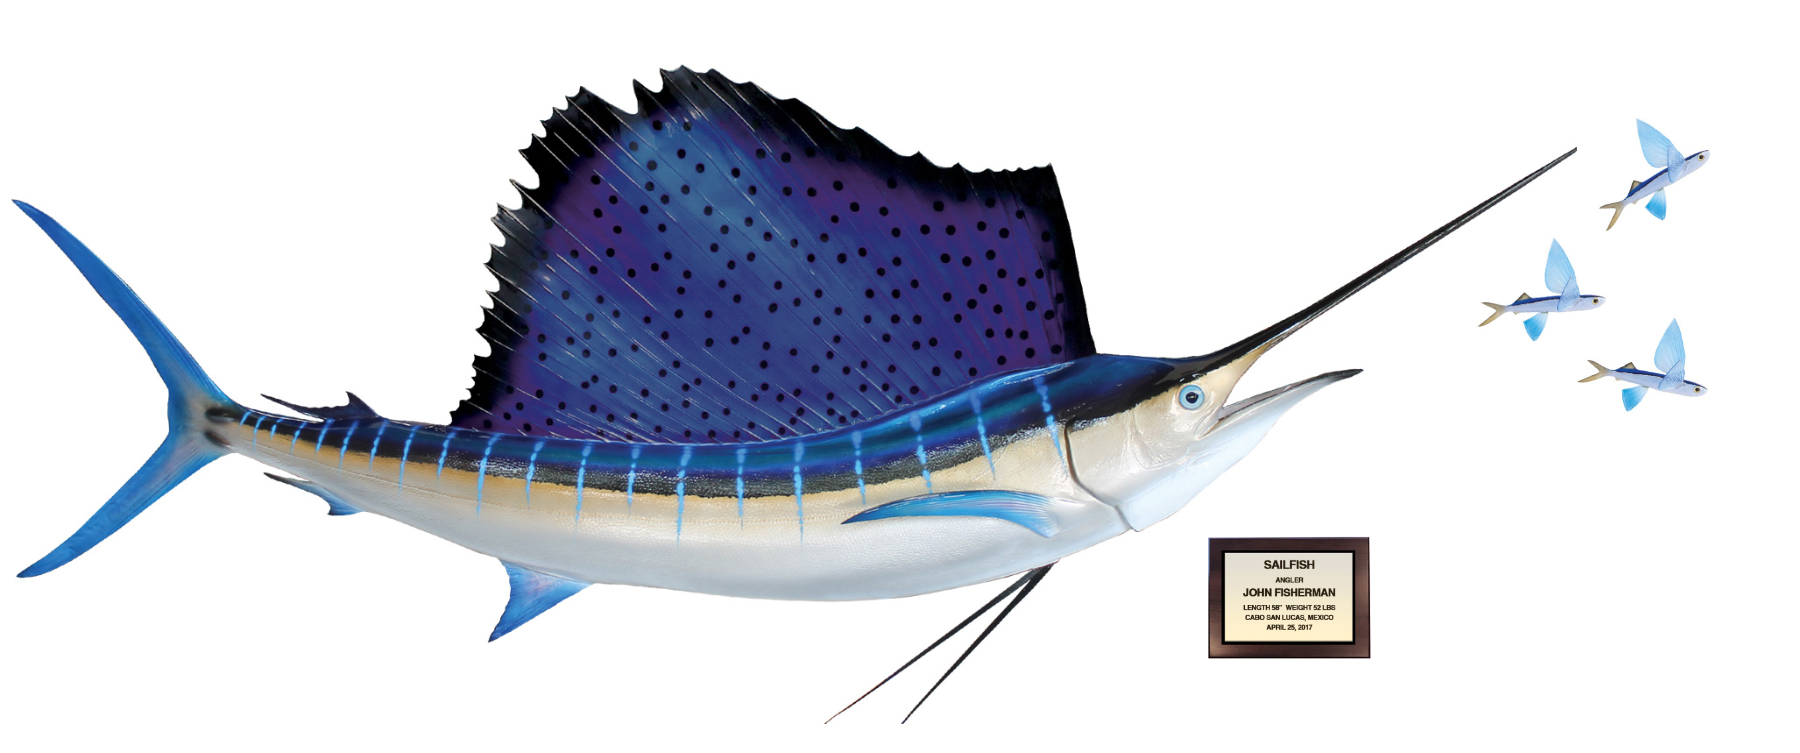 Atlantic Sailfish mount with plaque and flying fish